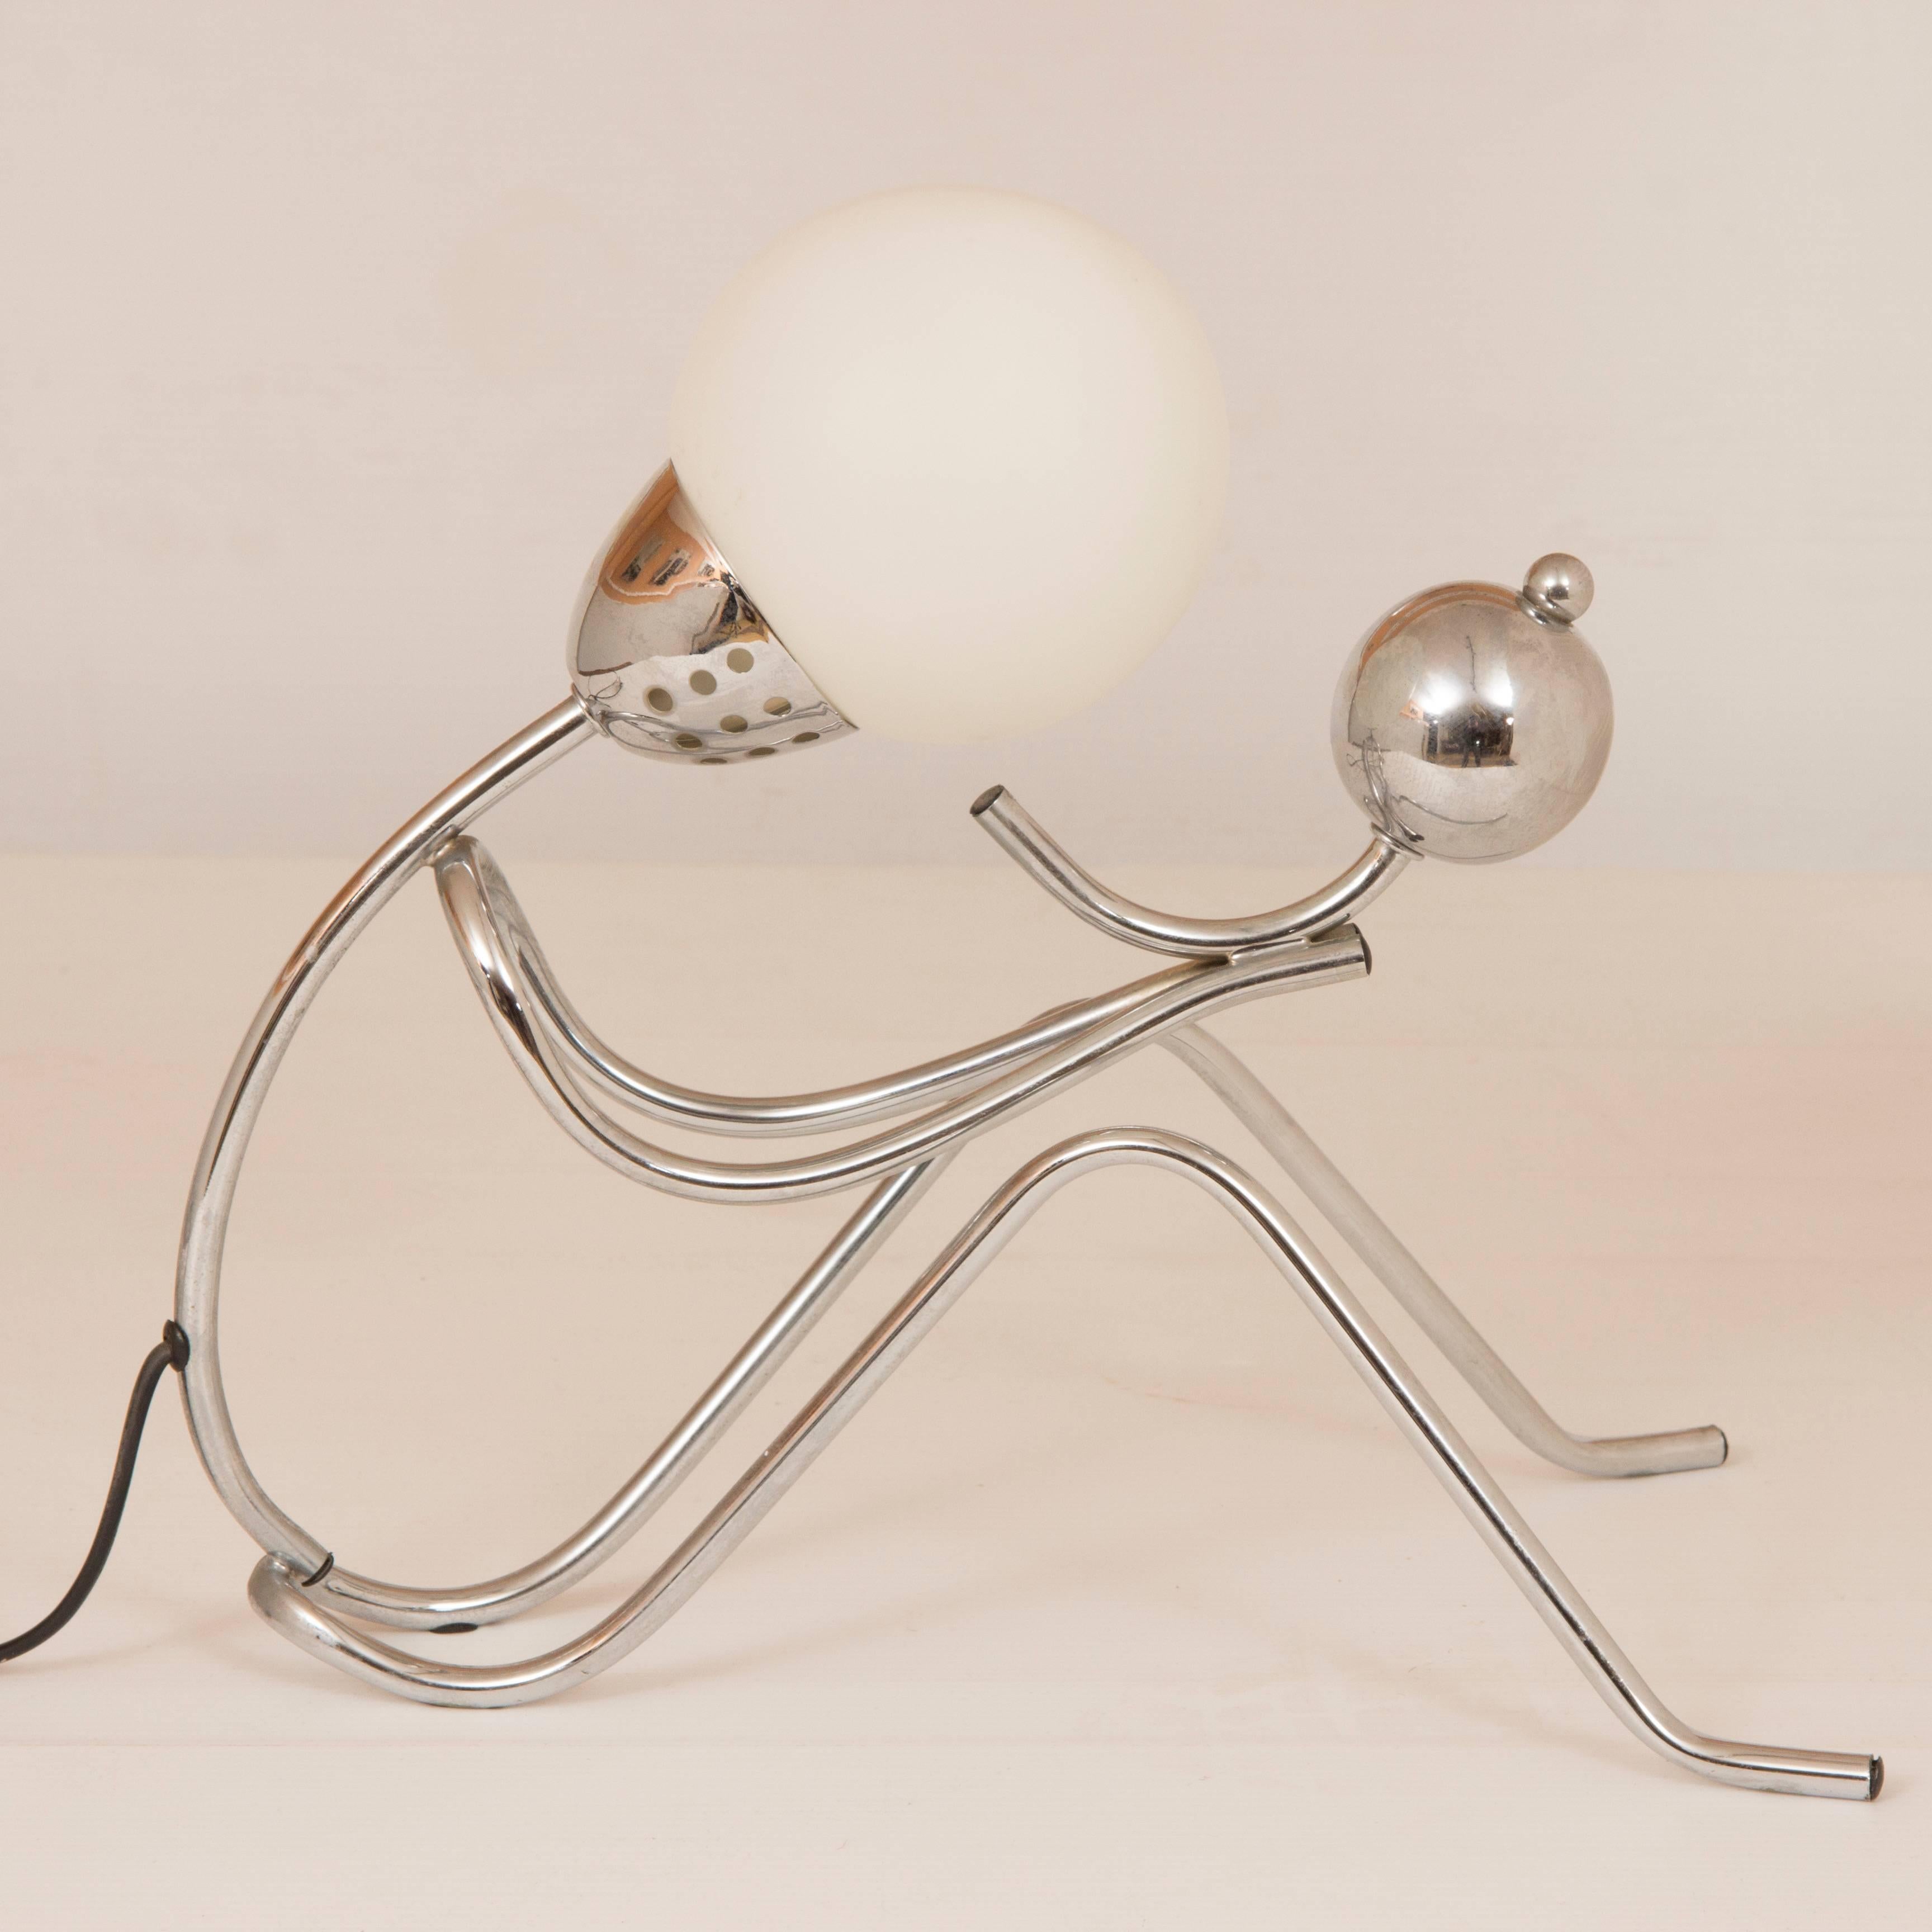 Awesome midcentury table lamp.
Midcentury table lamp figure with child.
Midcentury tubular chrome figure lamp holding baby.
British, circa 1970
Measures: H 35 cm, W 40 cm, D 24 cm.